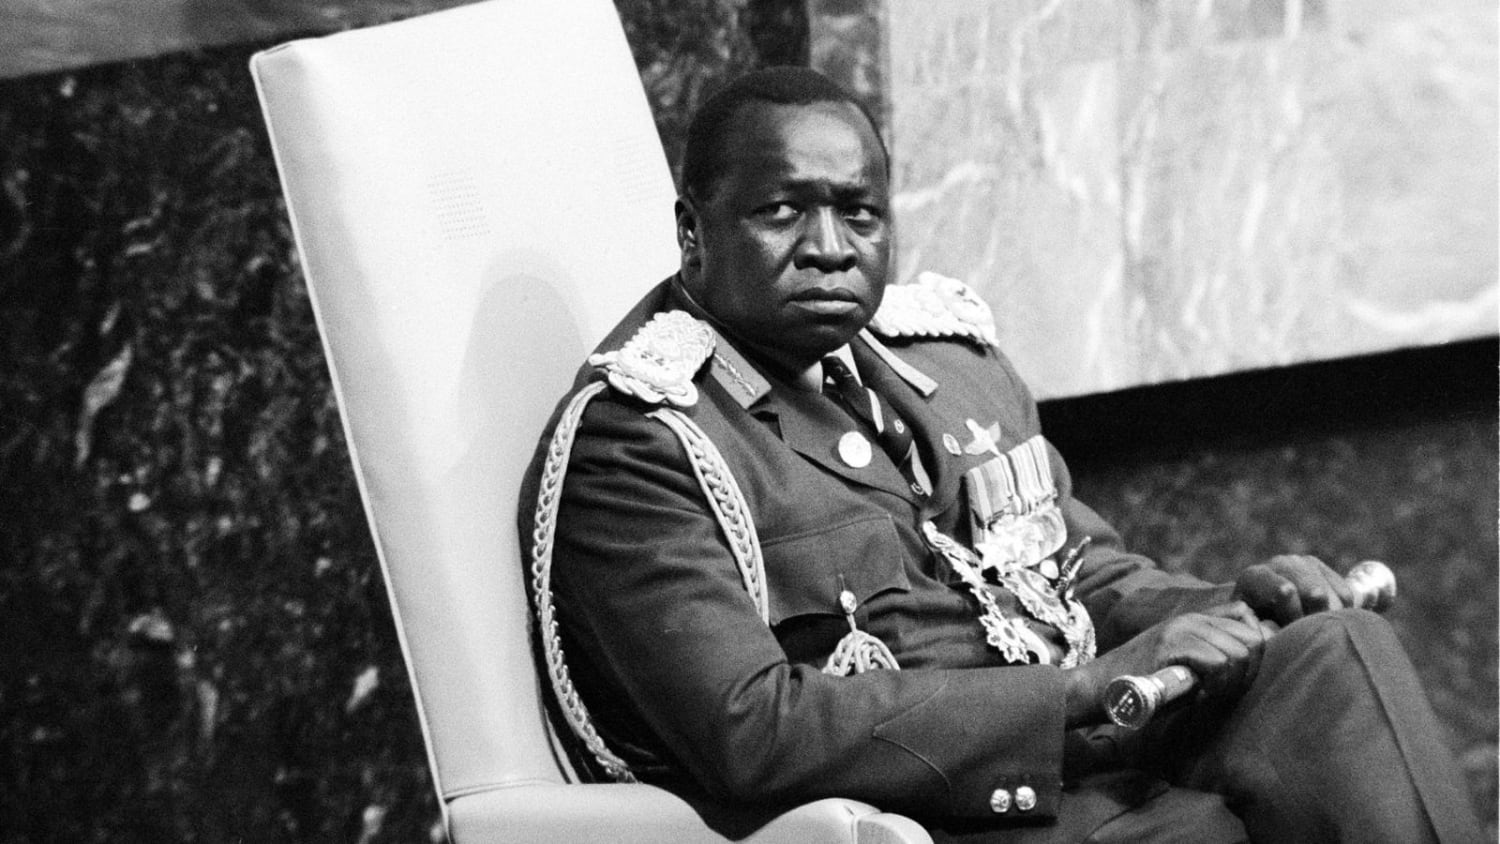 General Idi Amin, President of Uganda, waits to address the General Assembly at the United Nations headquarters in New York, on October 1, 1975.